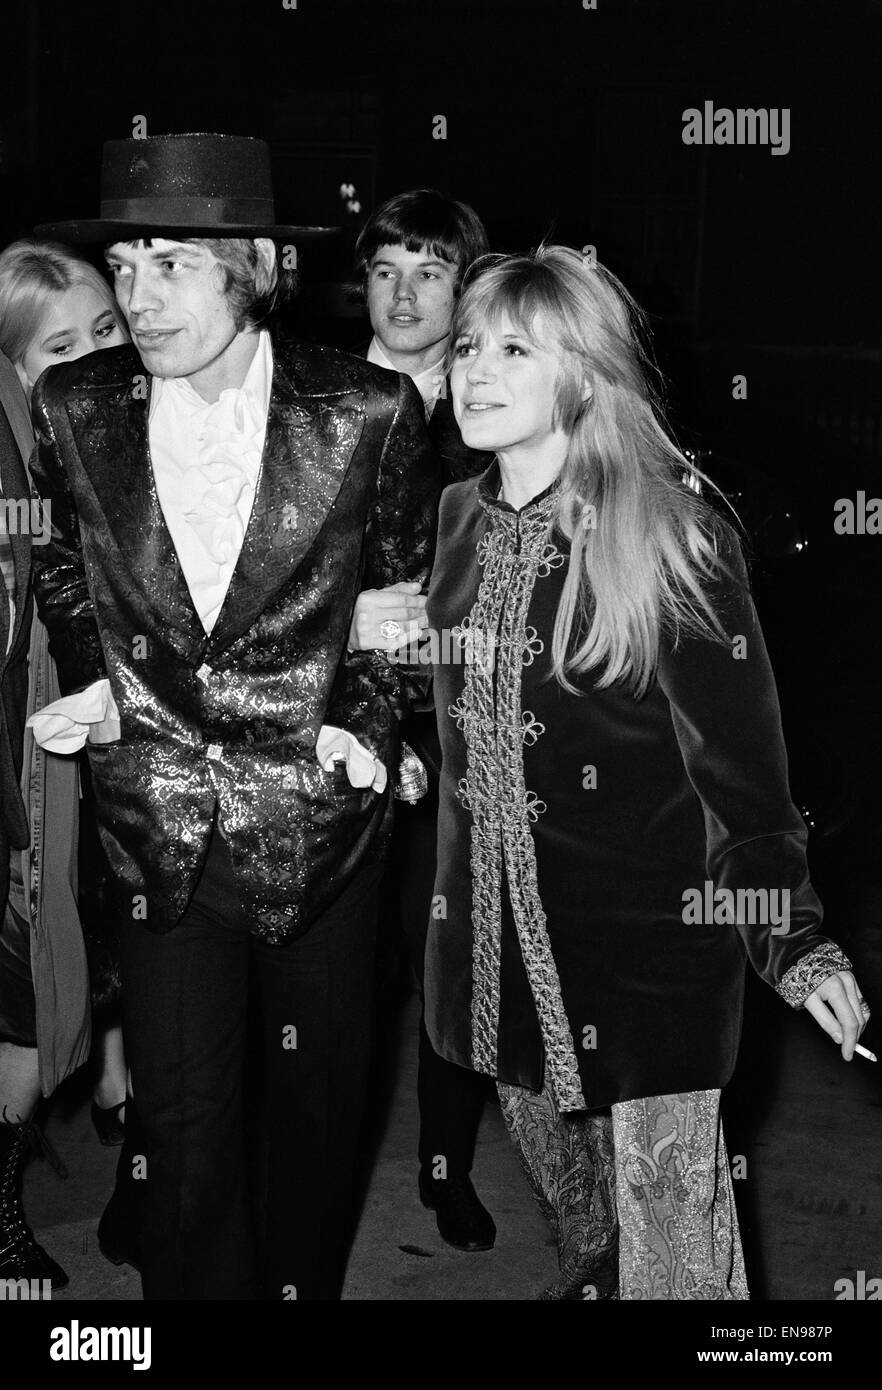 Mick Jagger of The Rolling Stones and Marianne Faithful arriving at The Royal Opera House to see a ballet premiere starring Margot Fonteyn and Rudolph Nureyev. 23rd February 1967. Stock Photo